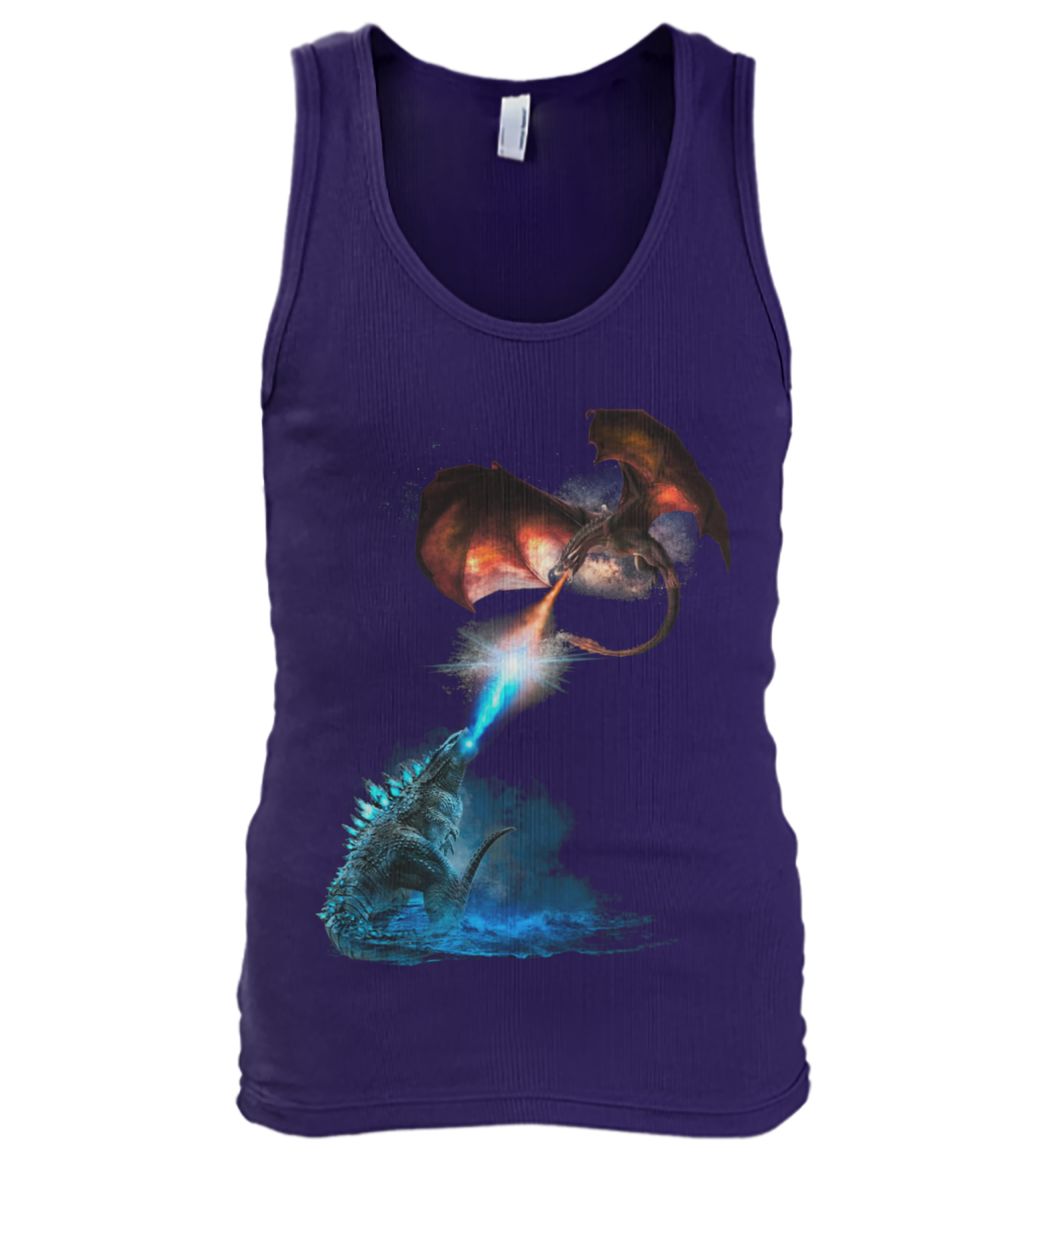 Godzilla fight with red dragon men's tank top